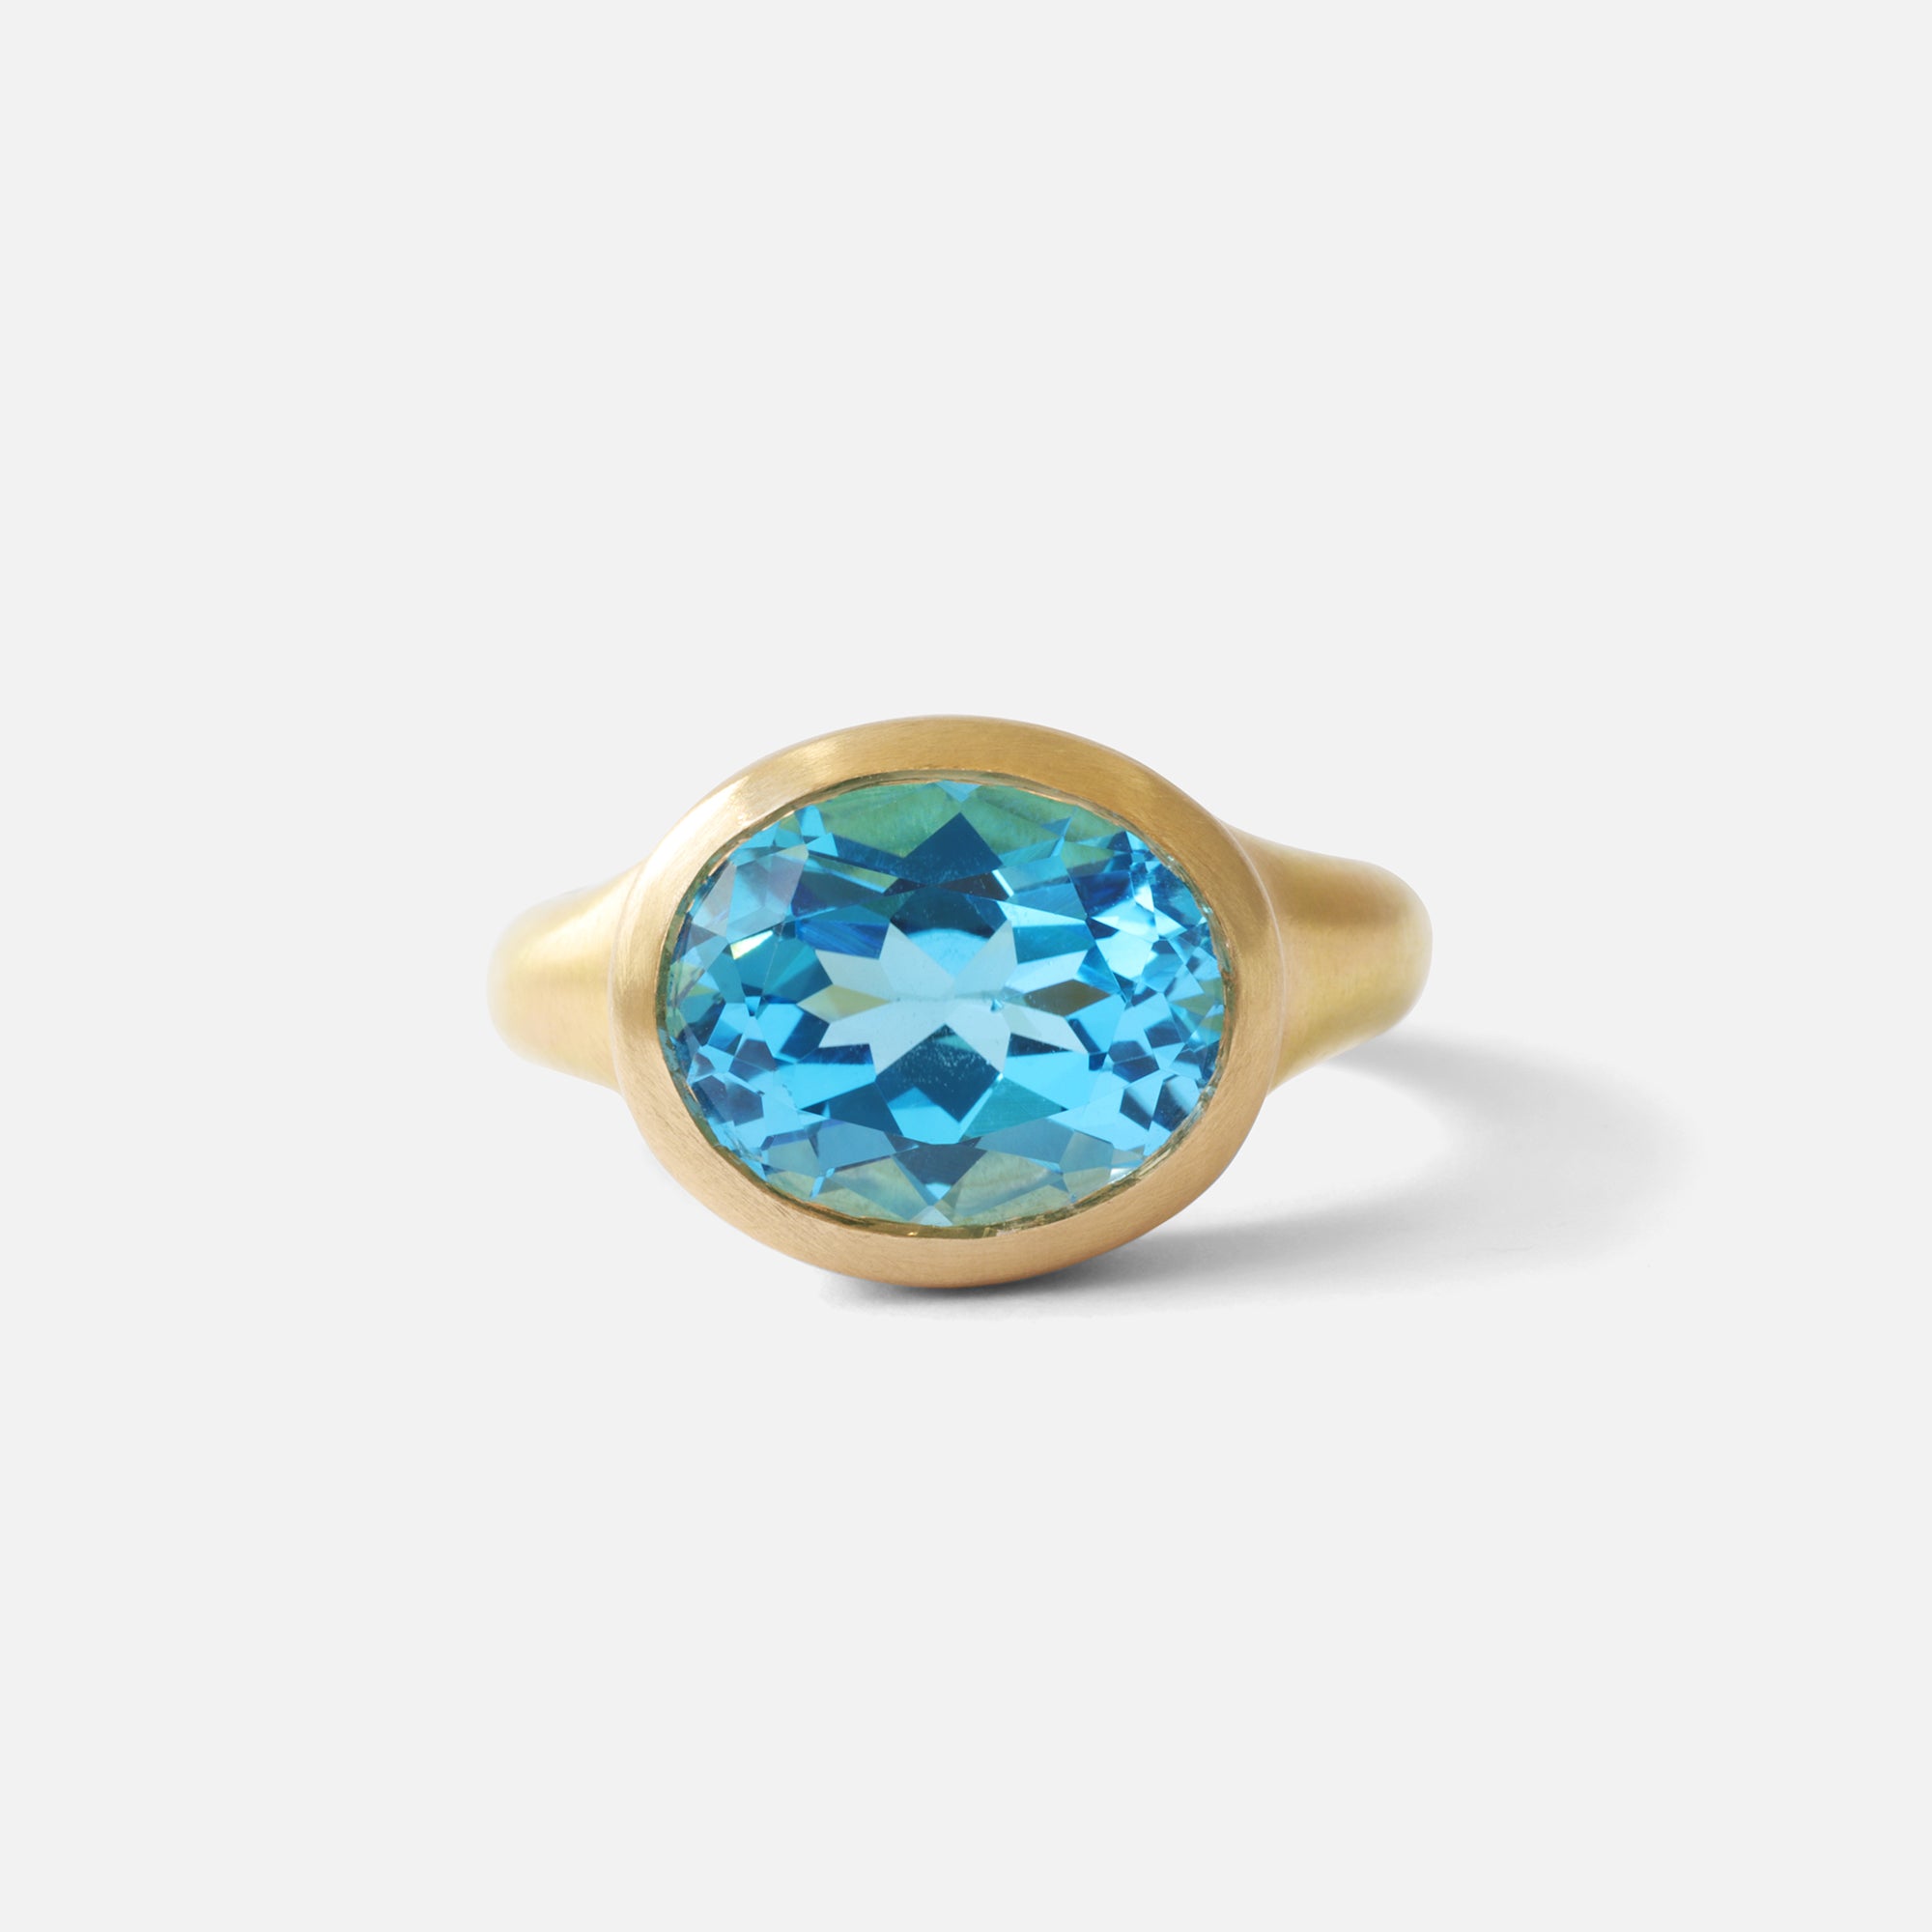 Swiss Blue Topaz Ring By Bree Altman in Engagement Rings Category